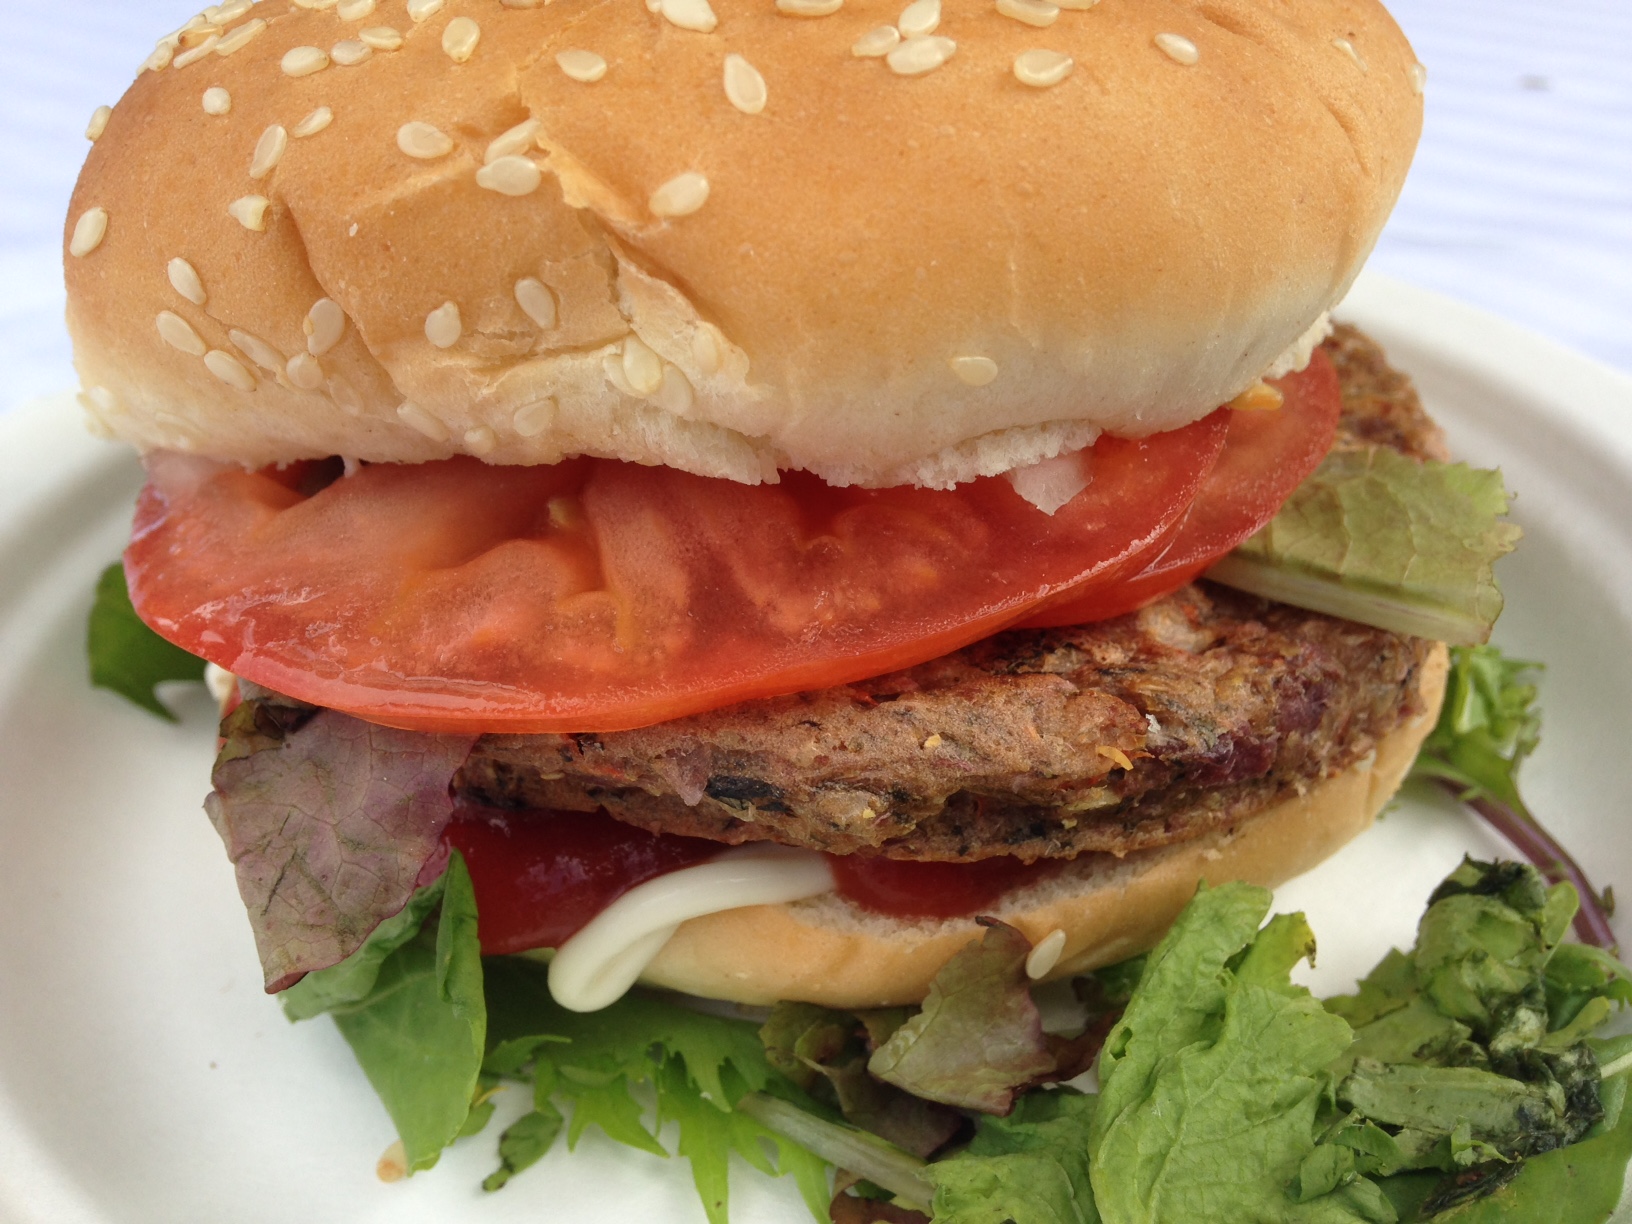 Taro burger patty with lettuce, tomato and onions.